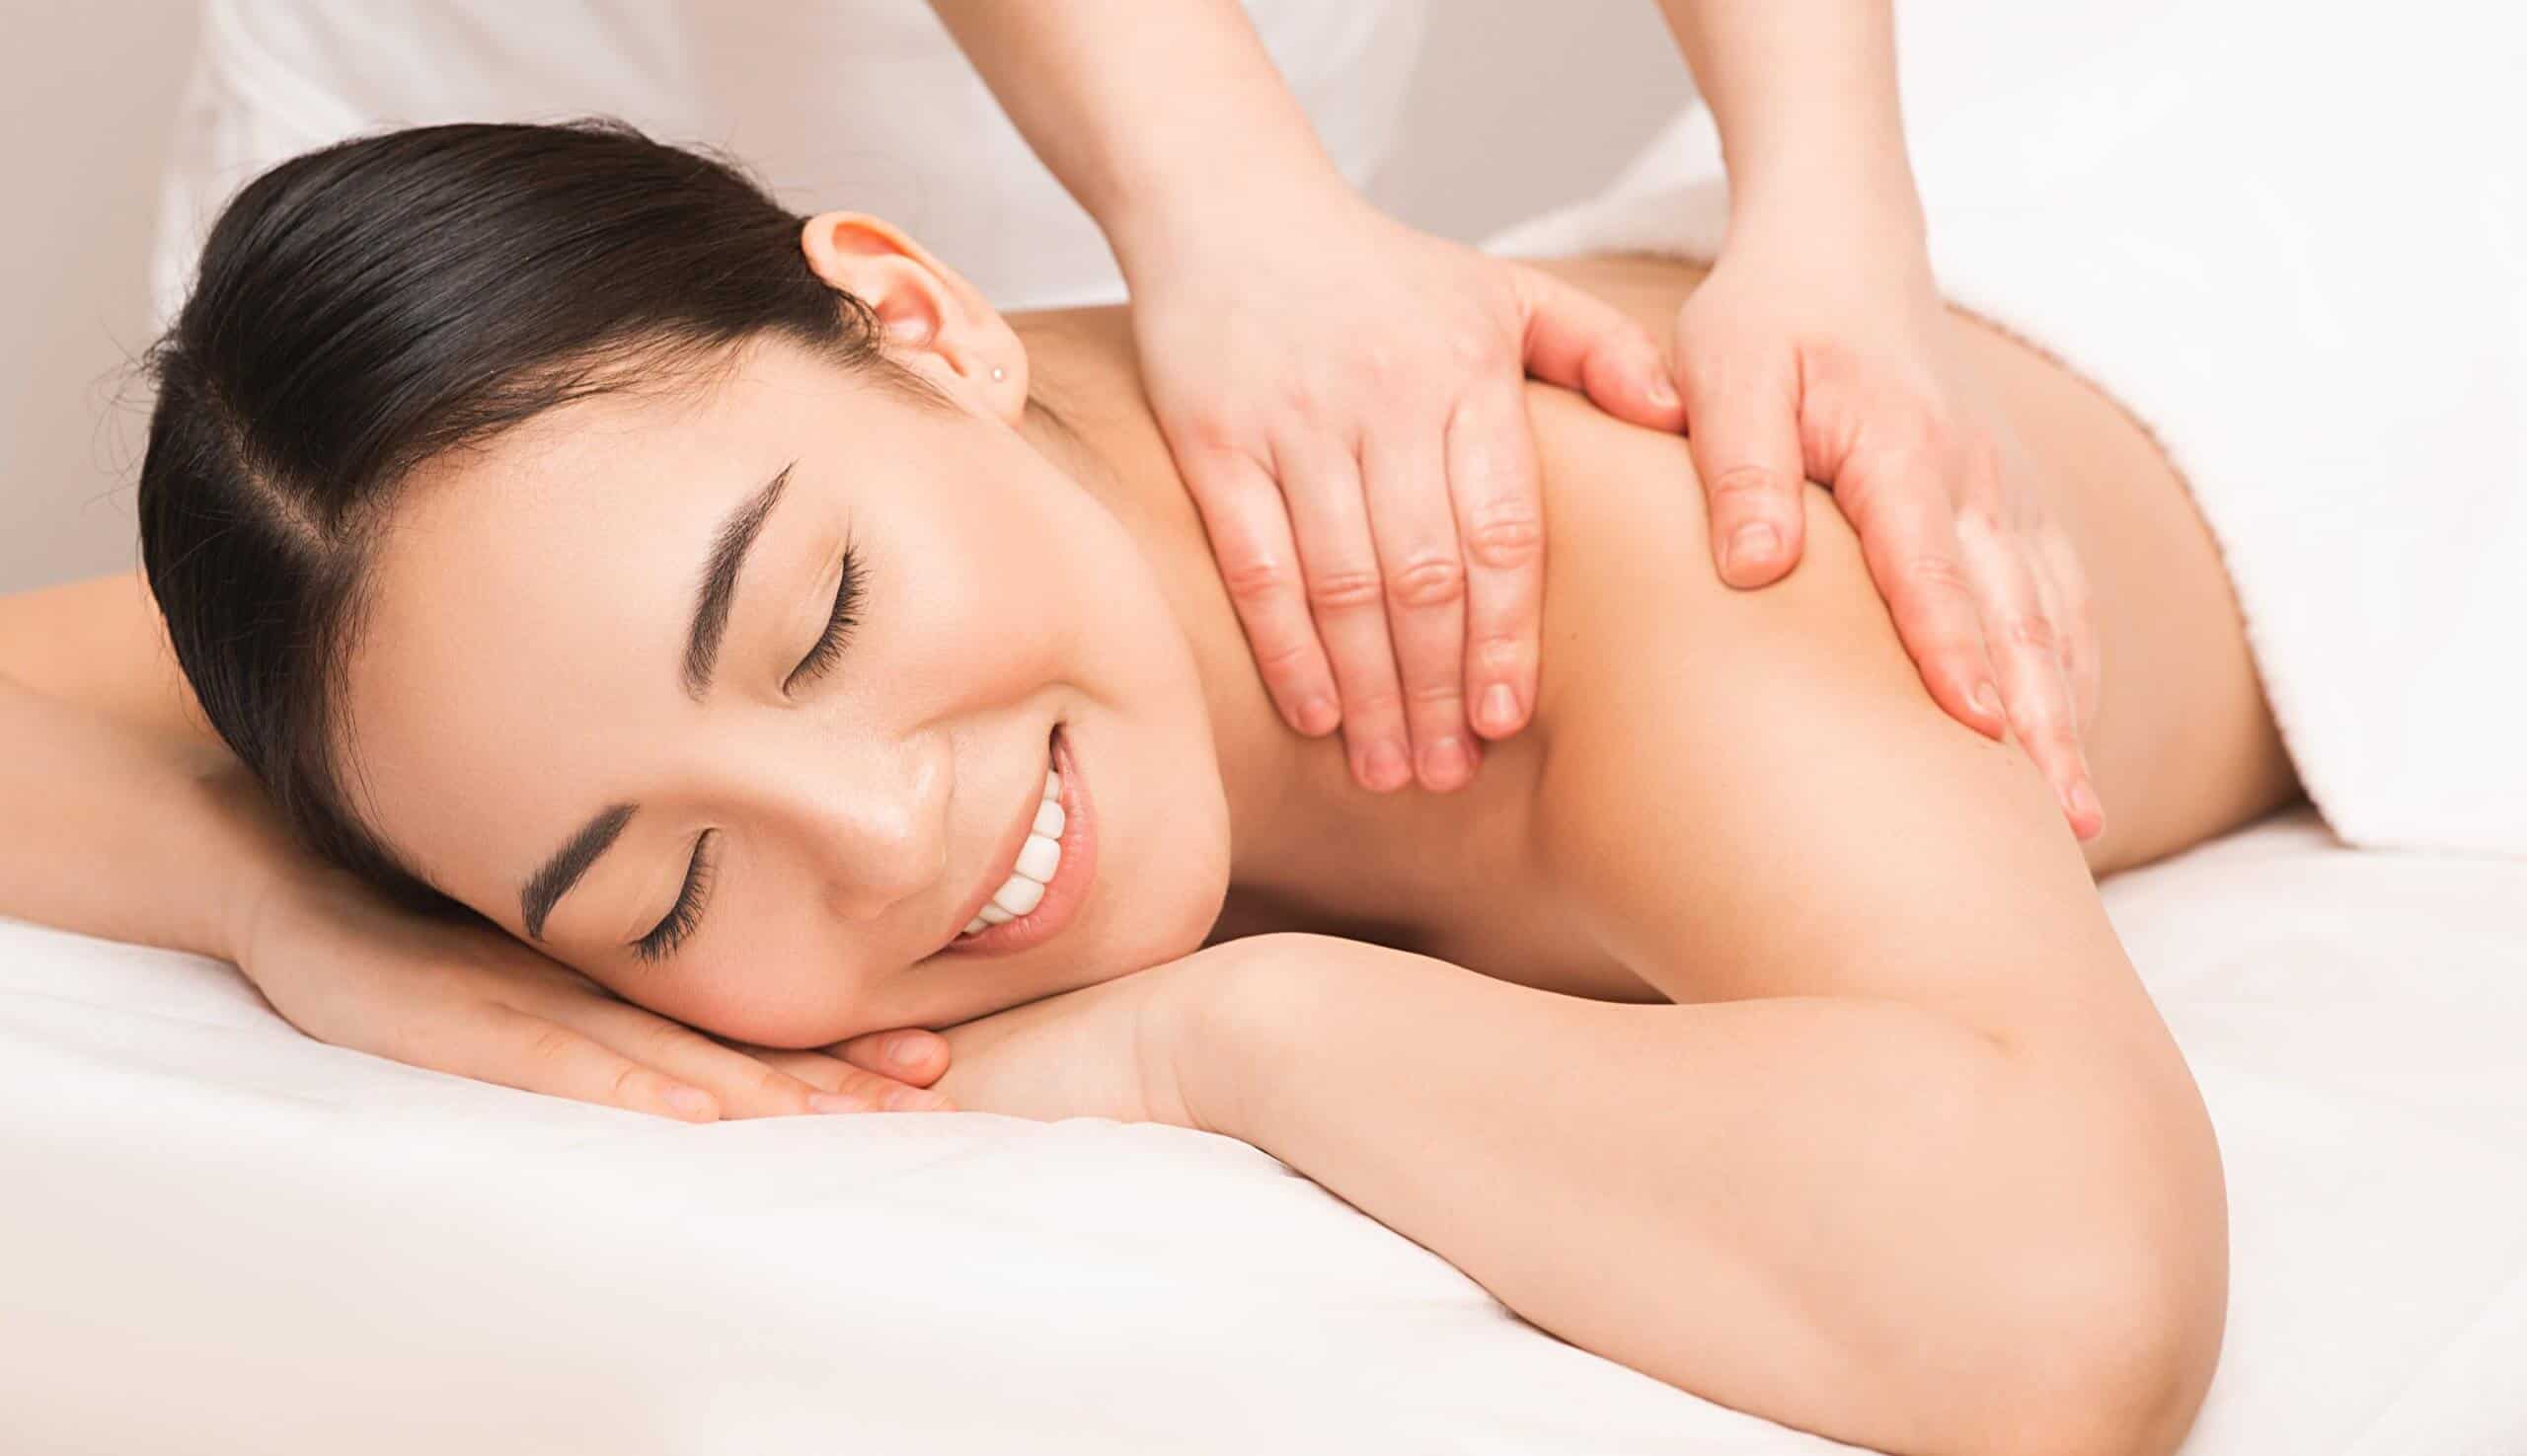 What are the Benefits of Full Body Therapy Massage